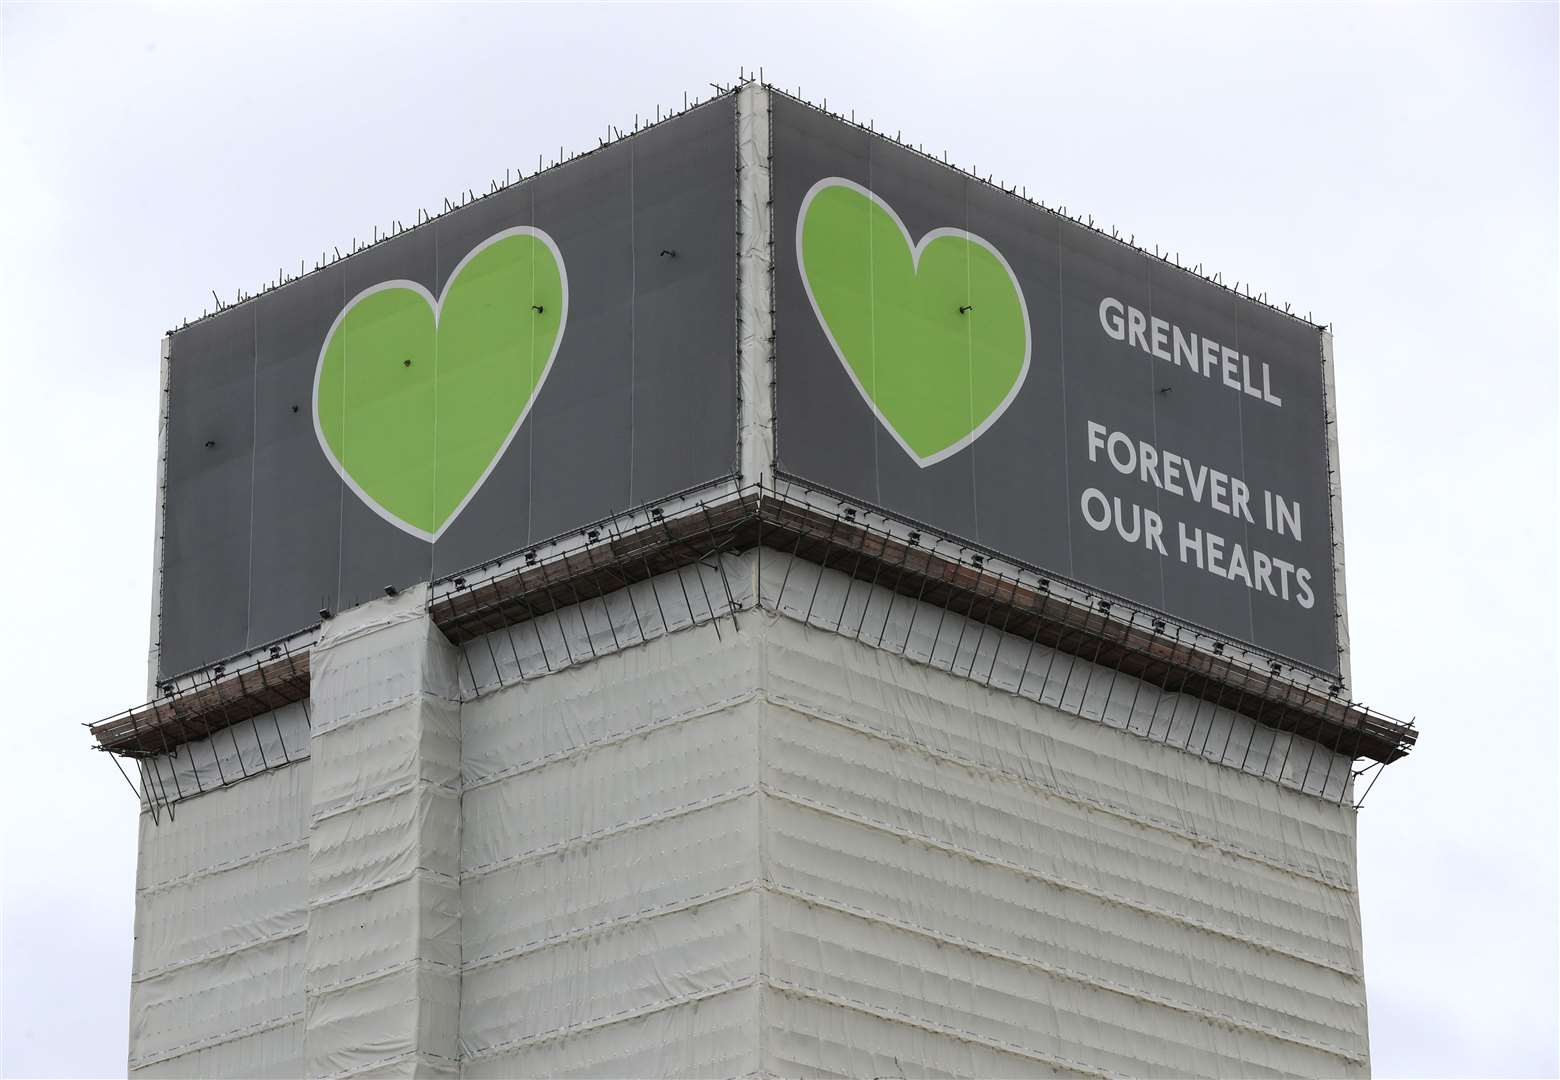 In June 2017 72 people died in a fire at Grenfell Tower in London (PA)